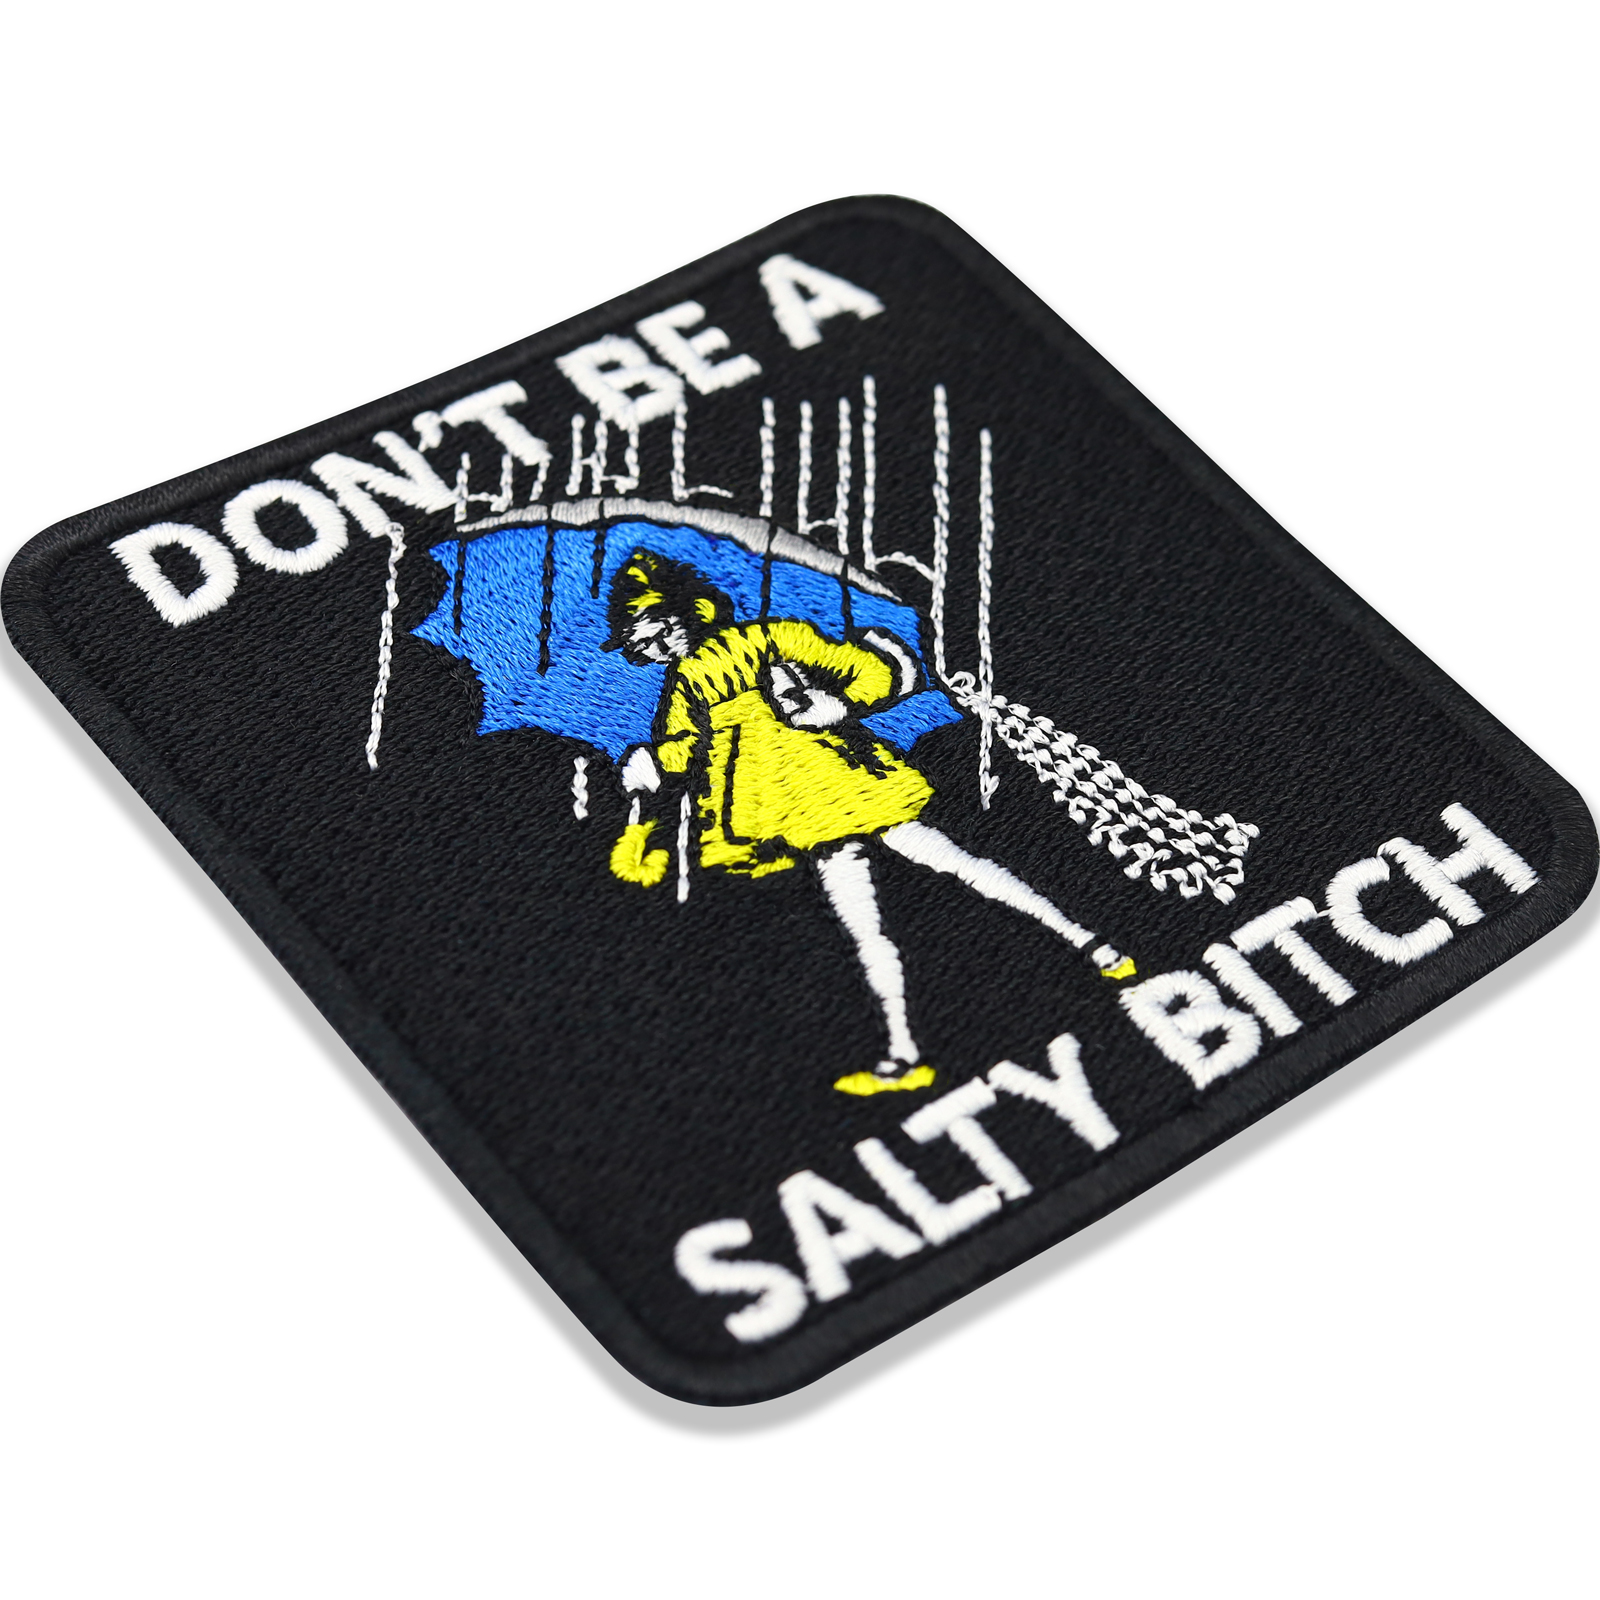 Don´t be a salty bitch - Patch